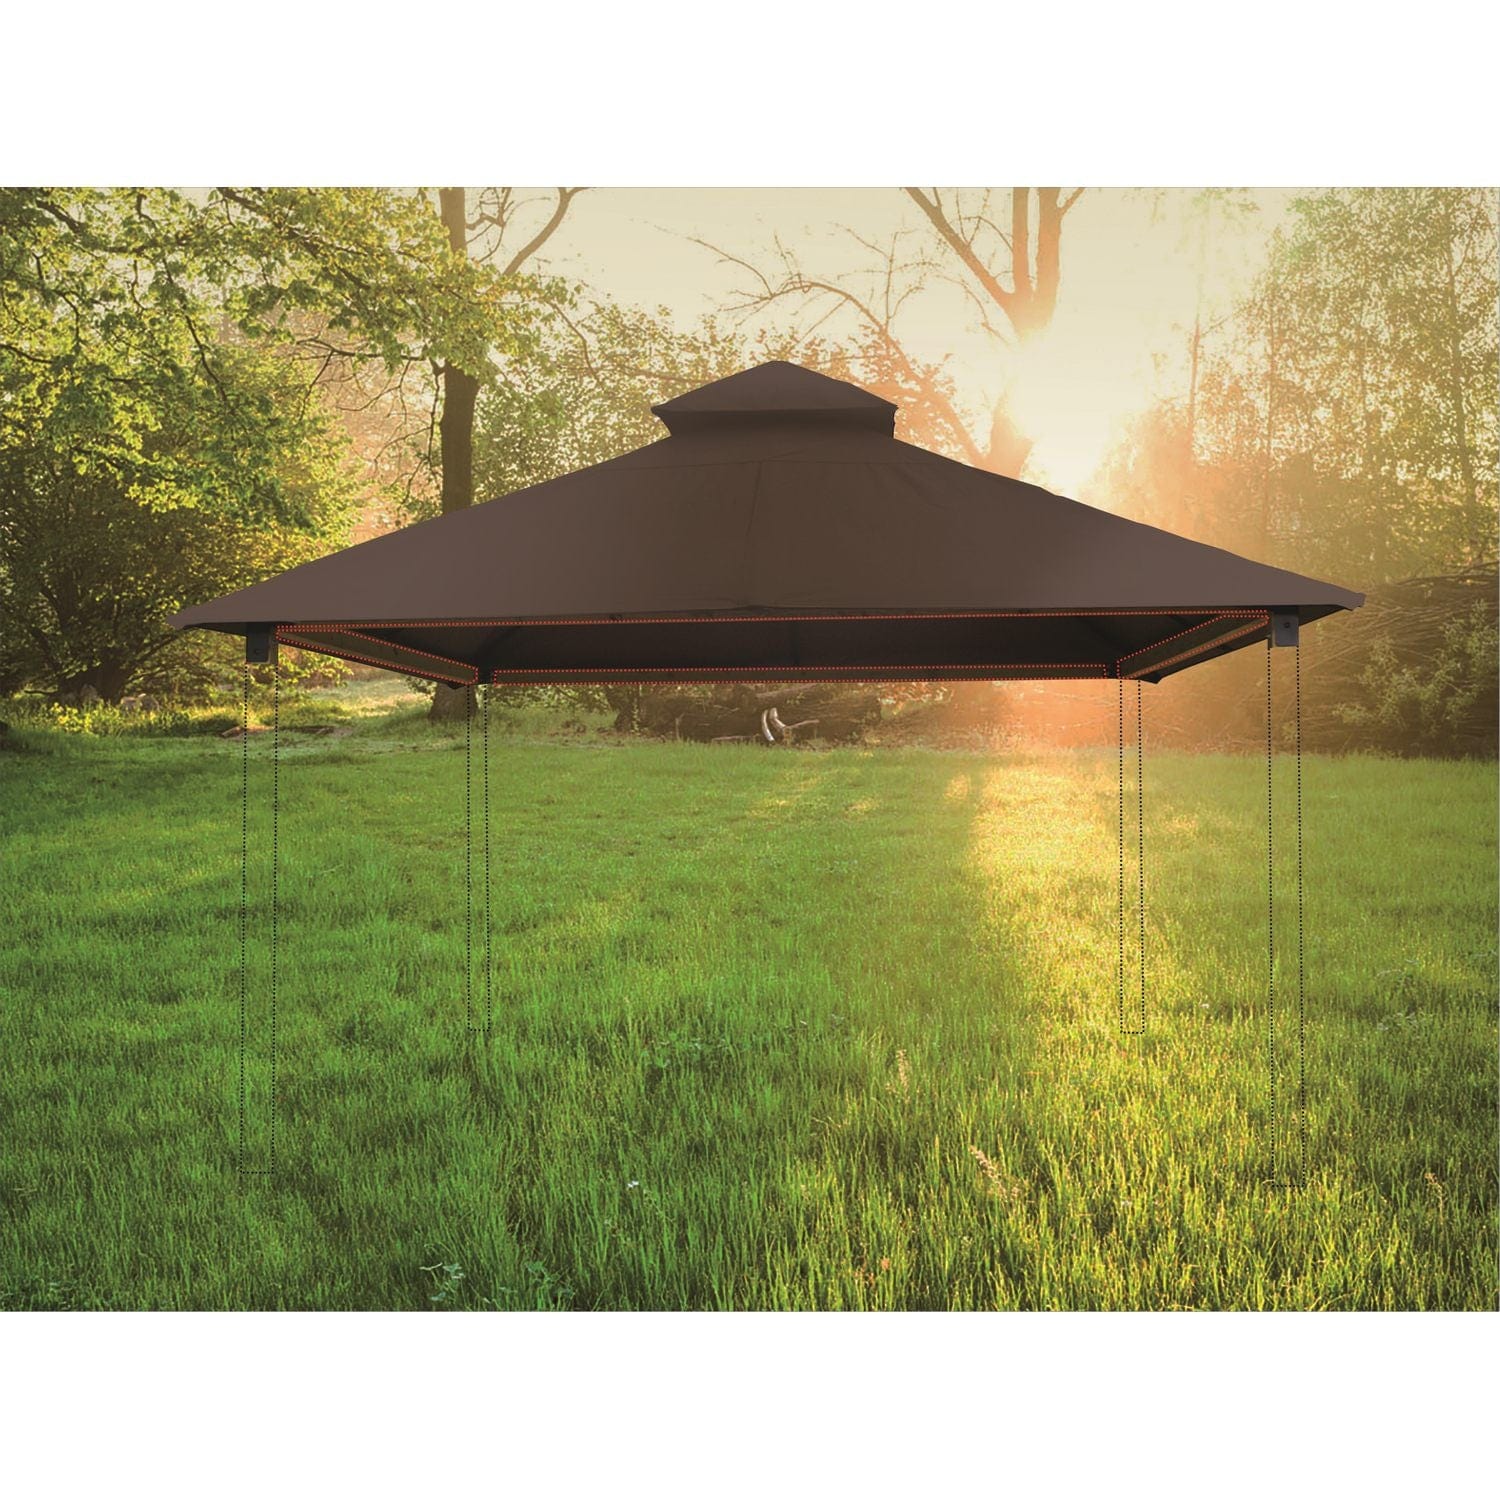 Riverstone Industries Soft Top Gazebos Riverstone | ACACIA Gazebo Roof Framing and Mounting Kit With OutDURA Canopy - Desert Beige